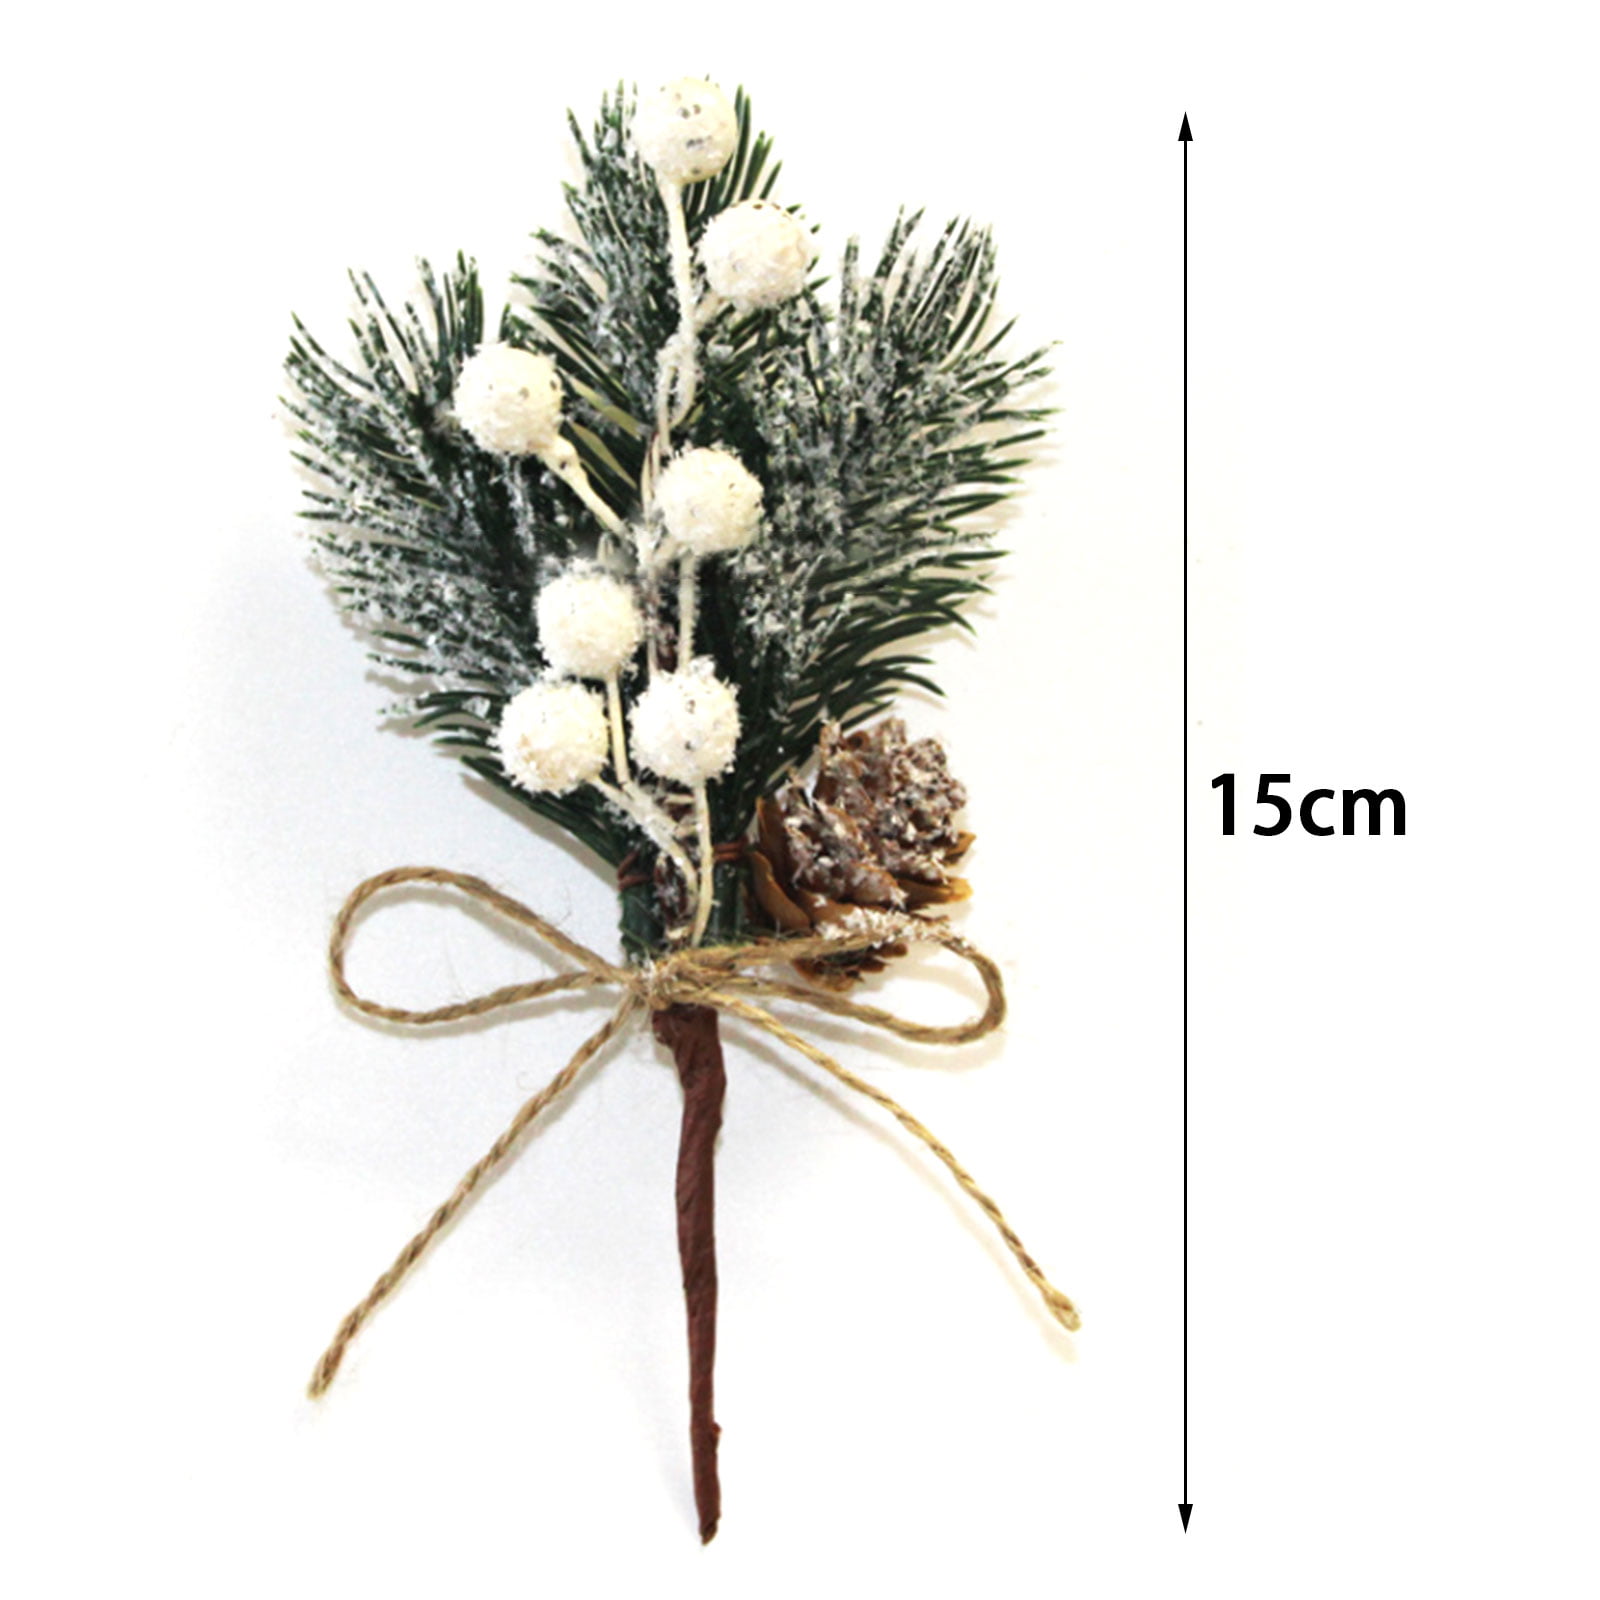 10pcs 9inch Christmas Floral Pine Cones, White Red Berry Stems, Artificial Pine Branches with Snowflakes Flocked Floral Picks for Crafts DIY Holiday